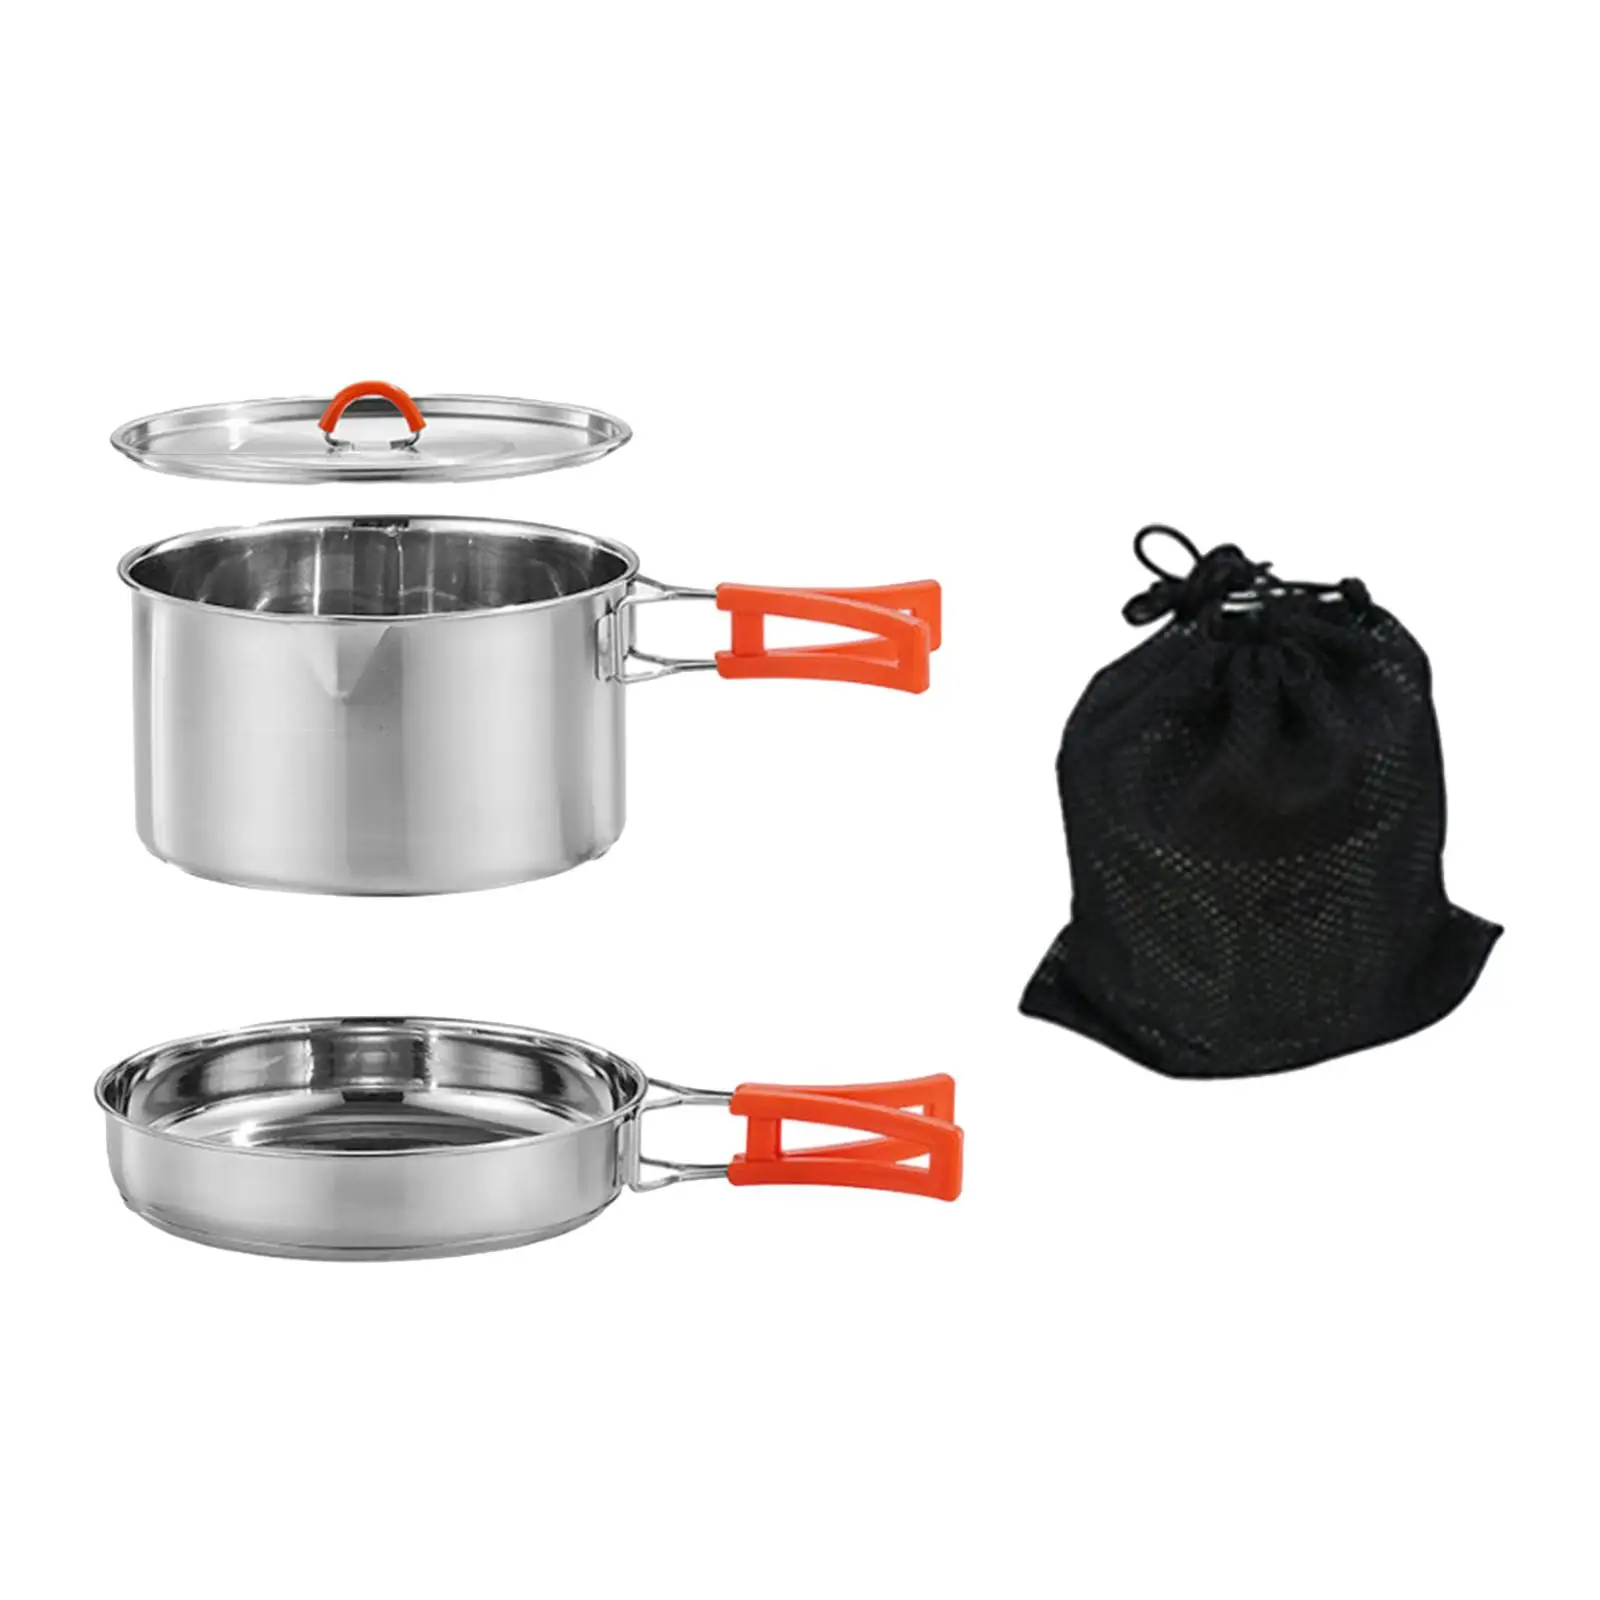 Camping Cookware Set, Lightweight Stainless Steel Camp Pot and Pan Set, Easy to Clean for Camp Outdoor Picnic Hiking Gear